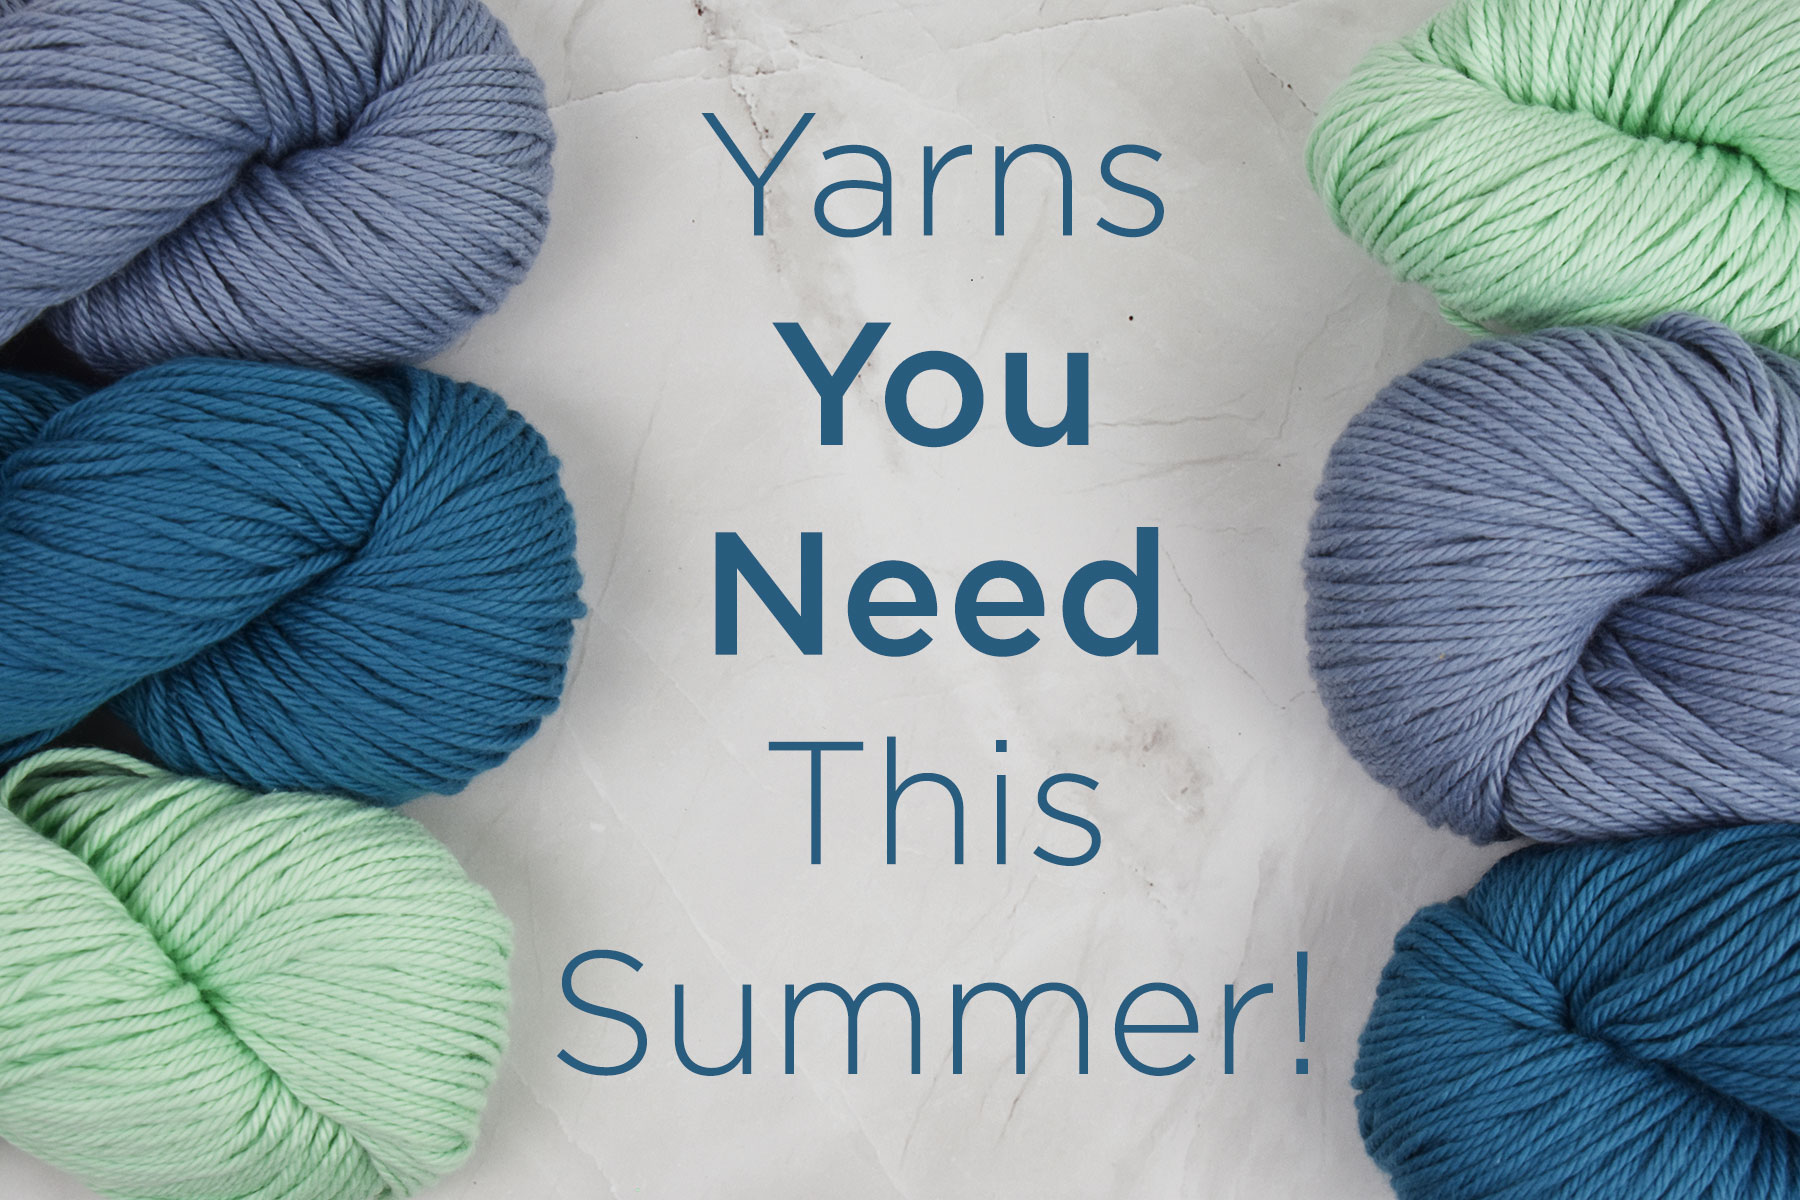 Cotton Supreme yarn in blue and green shades lines up to frame text which reads "Yarns you Need This Summer."